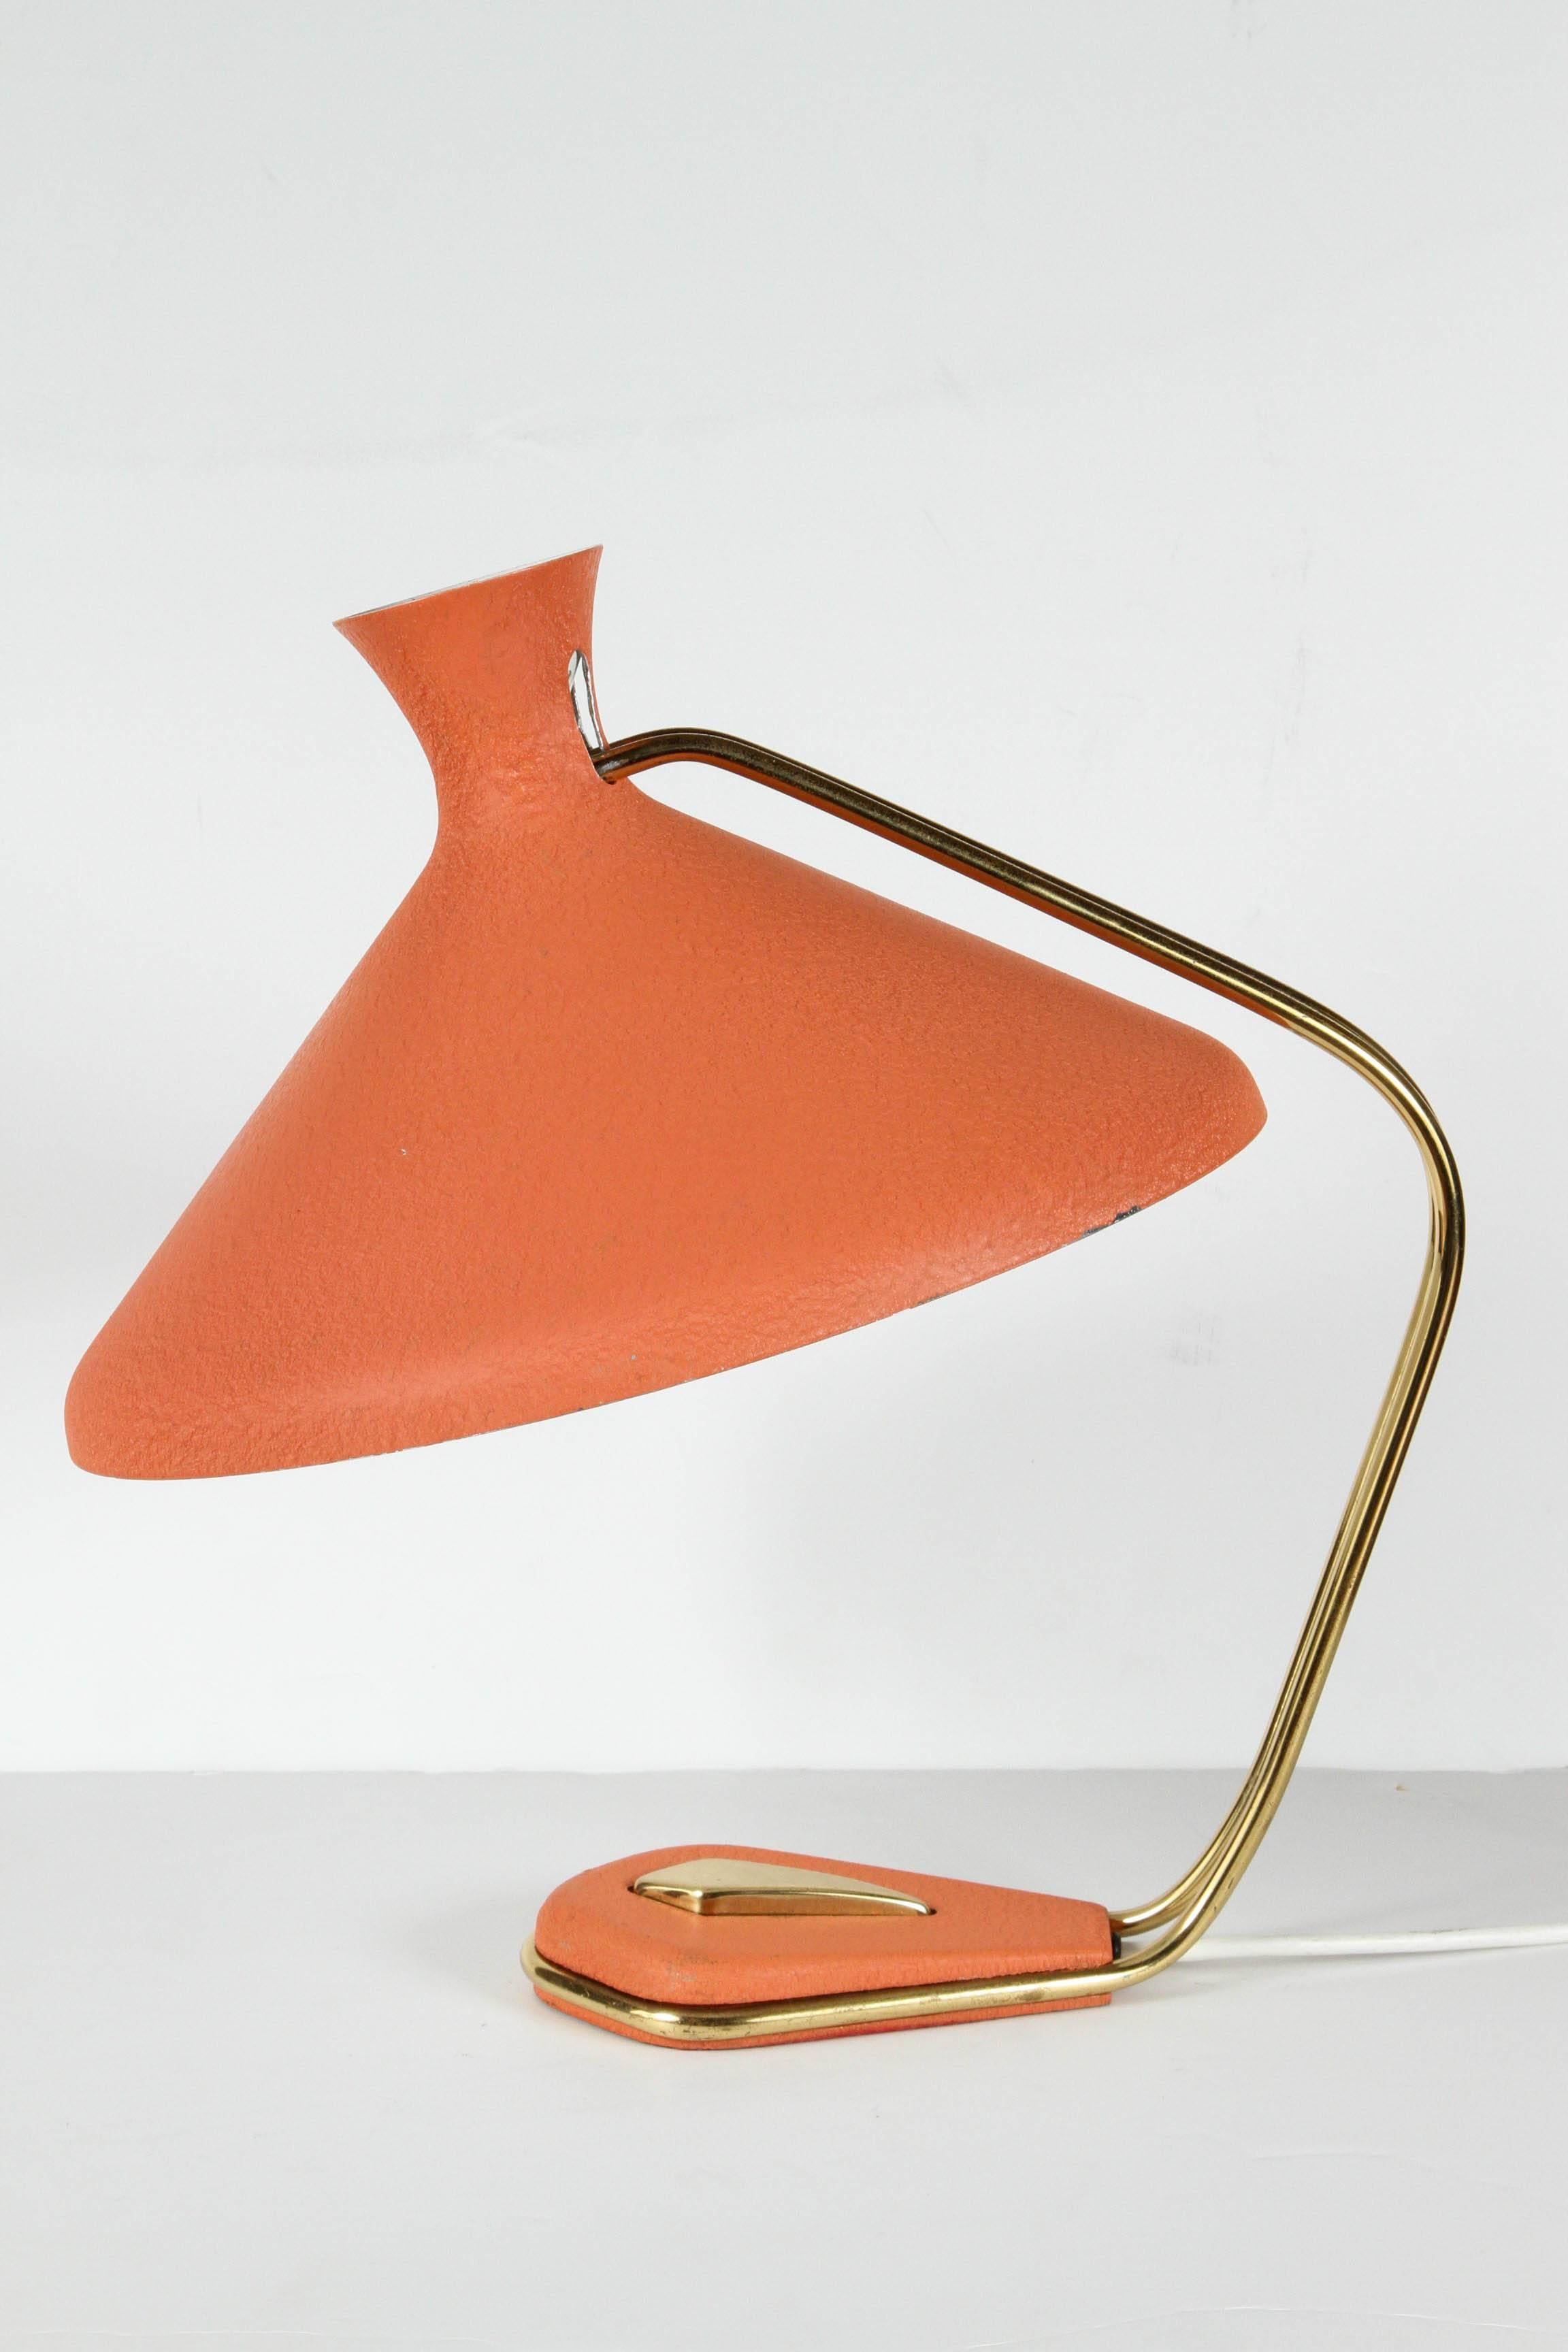 German Rare Stilnovo Table Lamp from the 1950s in the Manner of Louis Kalff